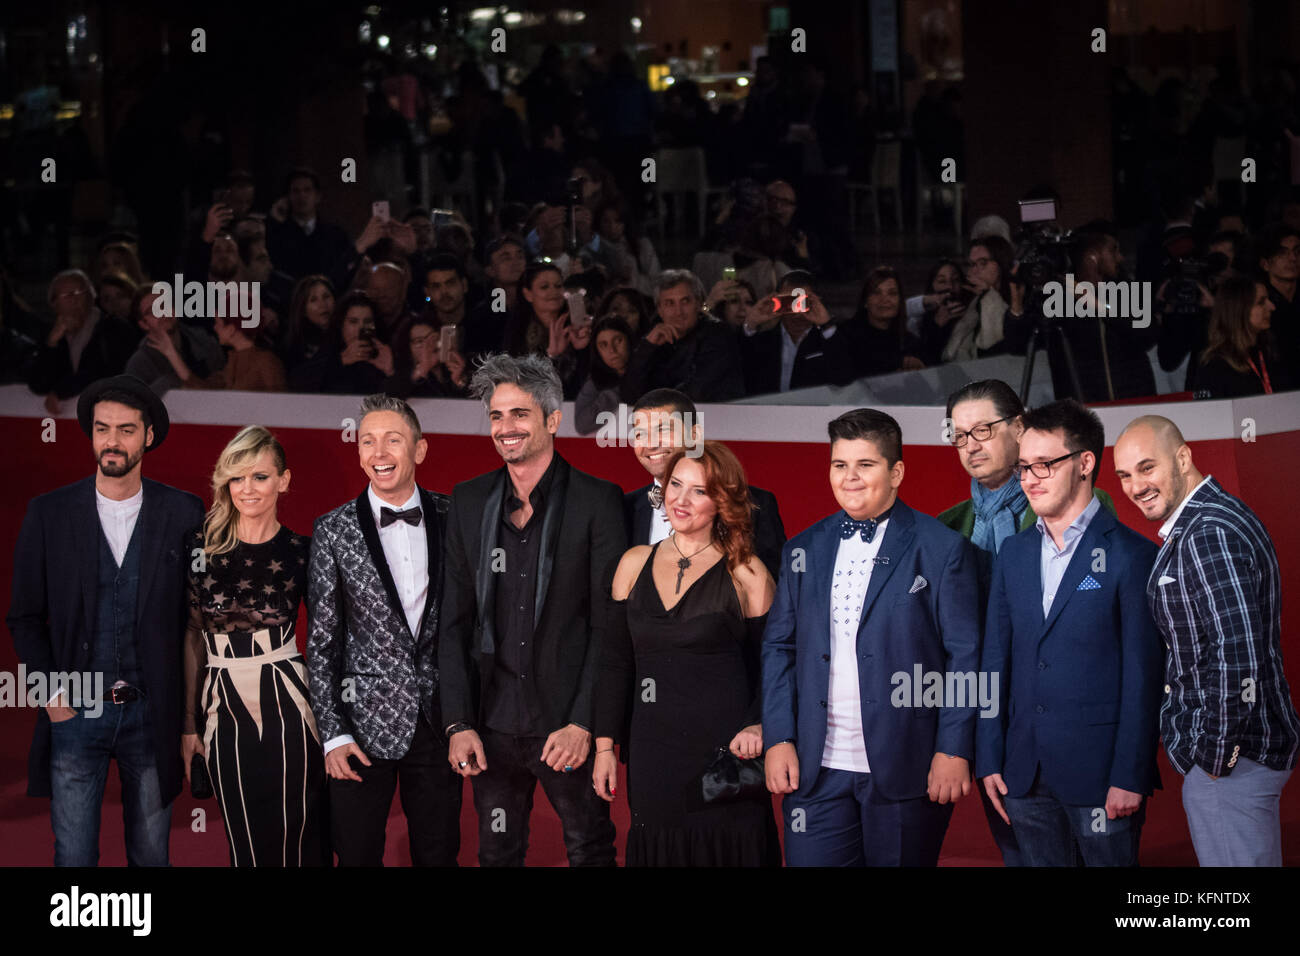 Rome, Italy. 30th Oct, 2017. Justine Mattera, Gianluca Mech and guests walks a red carpet for 'Good Food' during the 12th Rome Film Fest at Auditorium Parco Della Musica on October 30, 2017 in Rome, Italy. Credit: Andrea Ronchini/Pacific Press/Alamy Live News Stock Photo